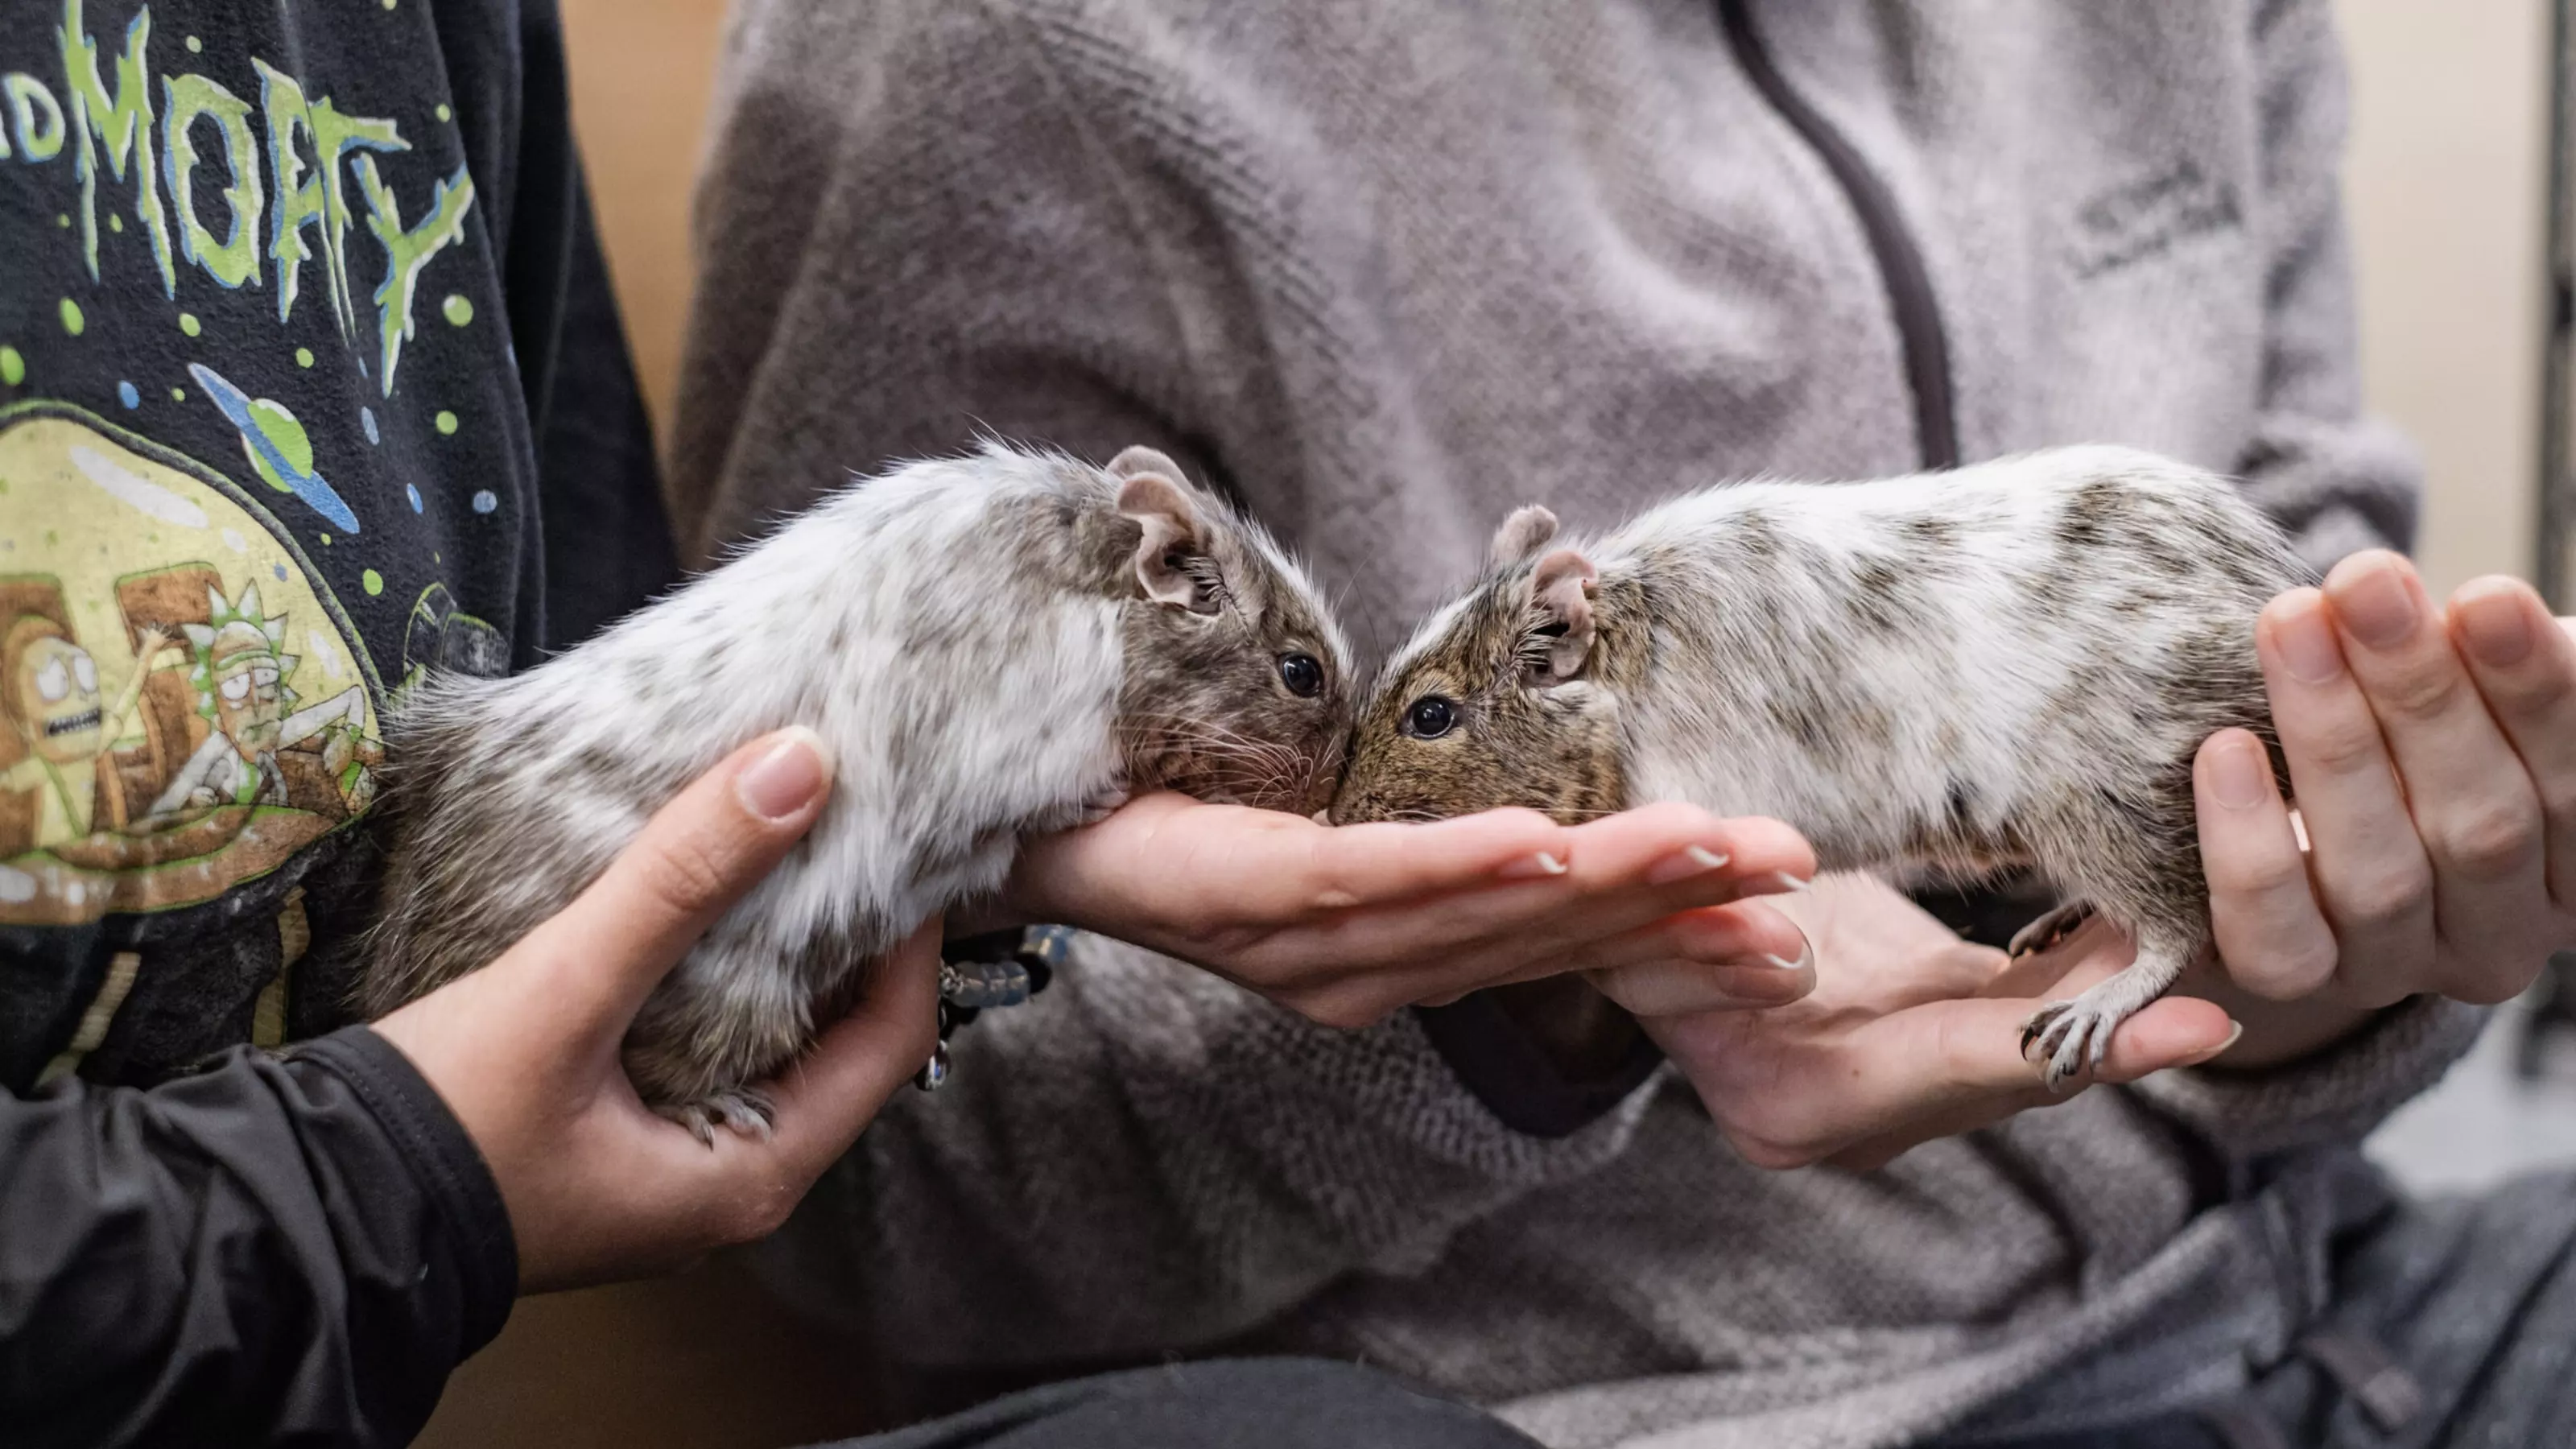 Two white and brown degus sit nose to nose on the hands of two young students